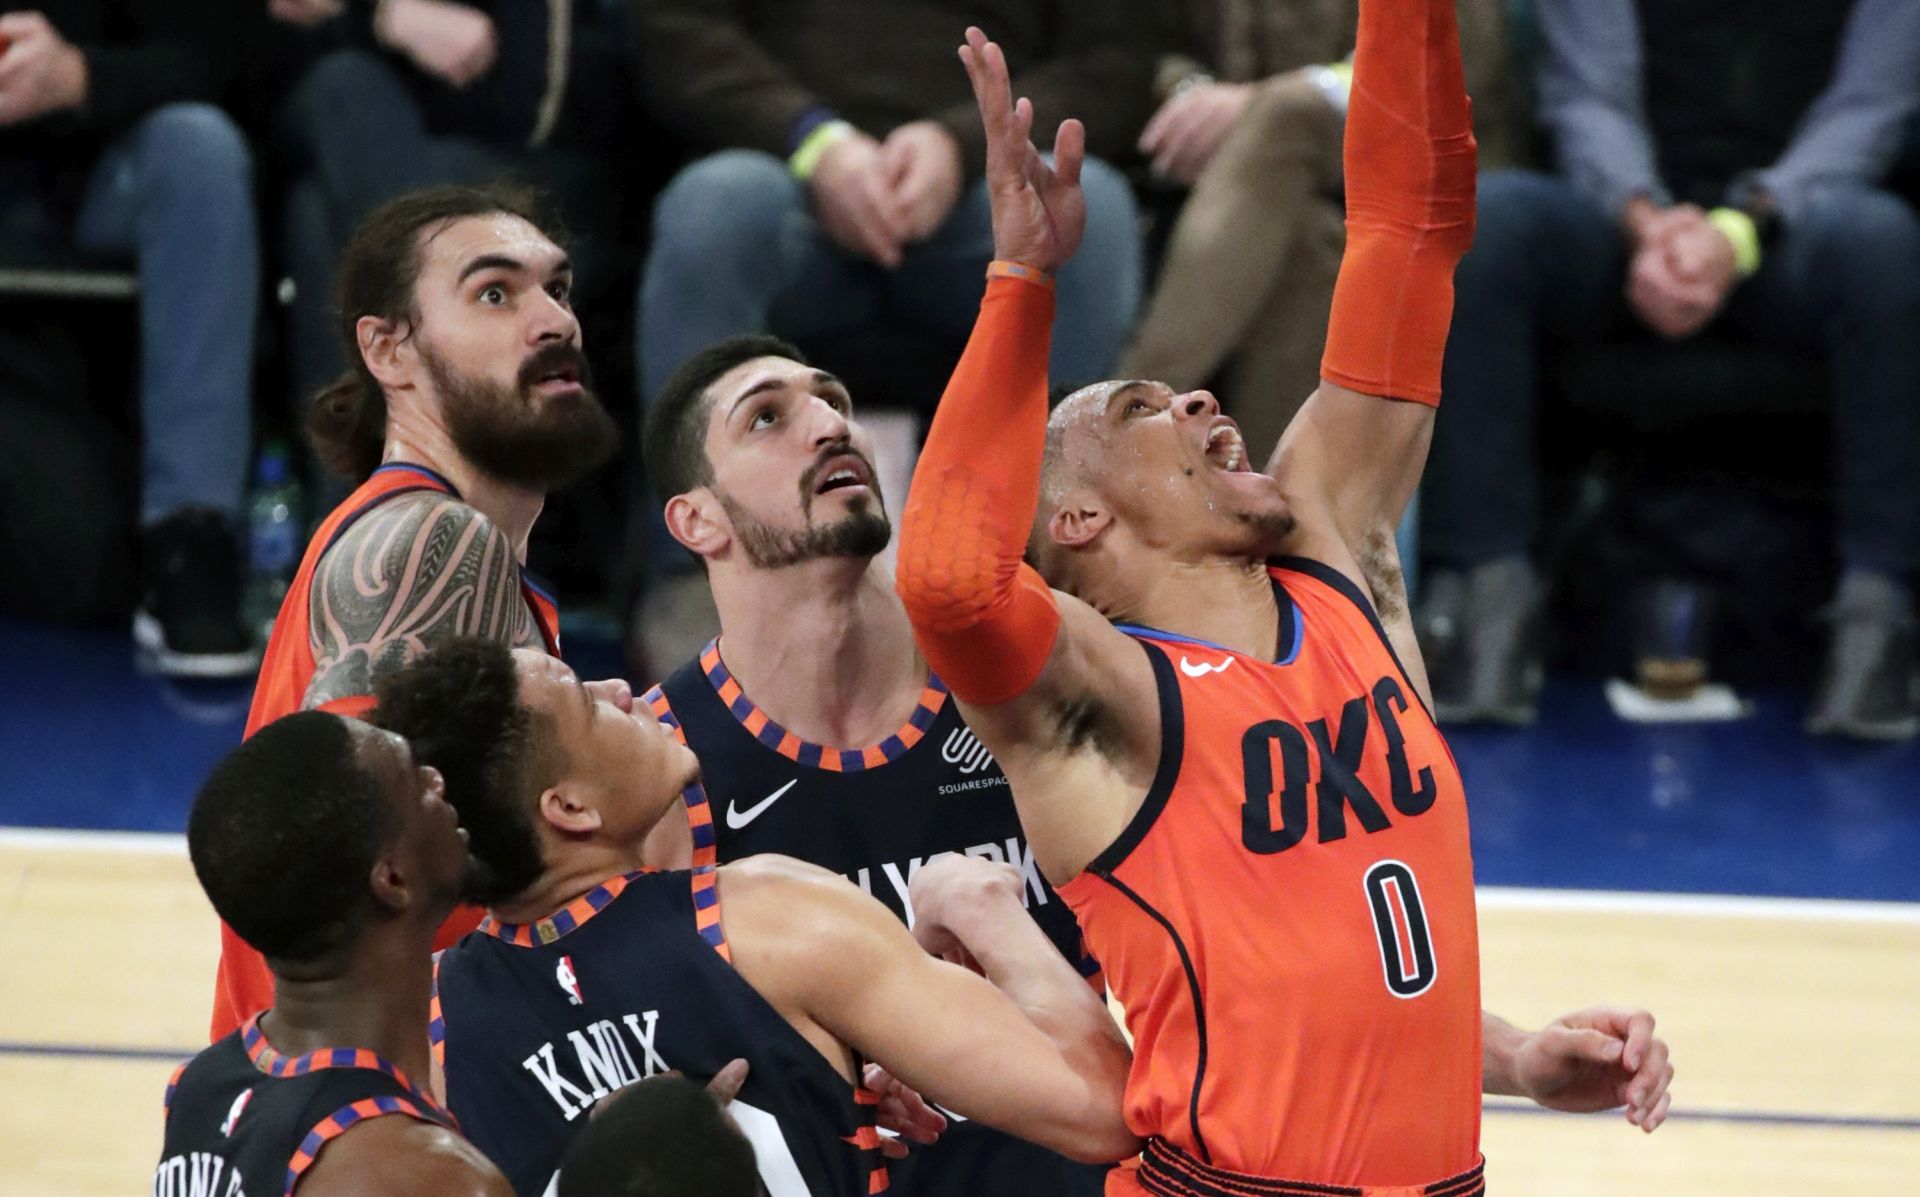 epa07307331 Oklahoma City Thunder guard Russell Westbrook (R) tries to put up a shot under the basket past the New York Knicks defense (L) in the second half of the NBA basketball game between the Oklahoma City Thunder and the New York Knicks at Madison Square Garden in New York, New York, USA, 21 January 2019.  EPA/JASON SZENES SHUTTERSTOCK OUT